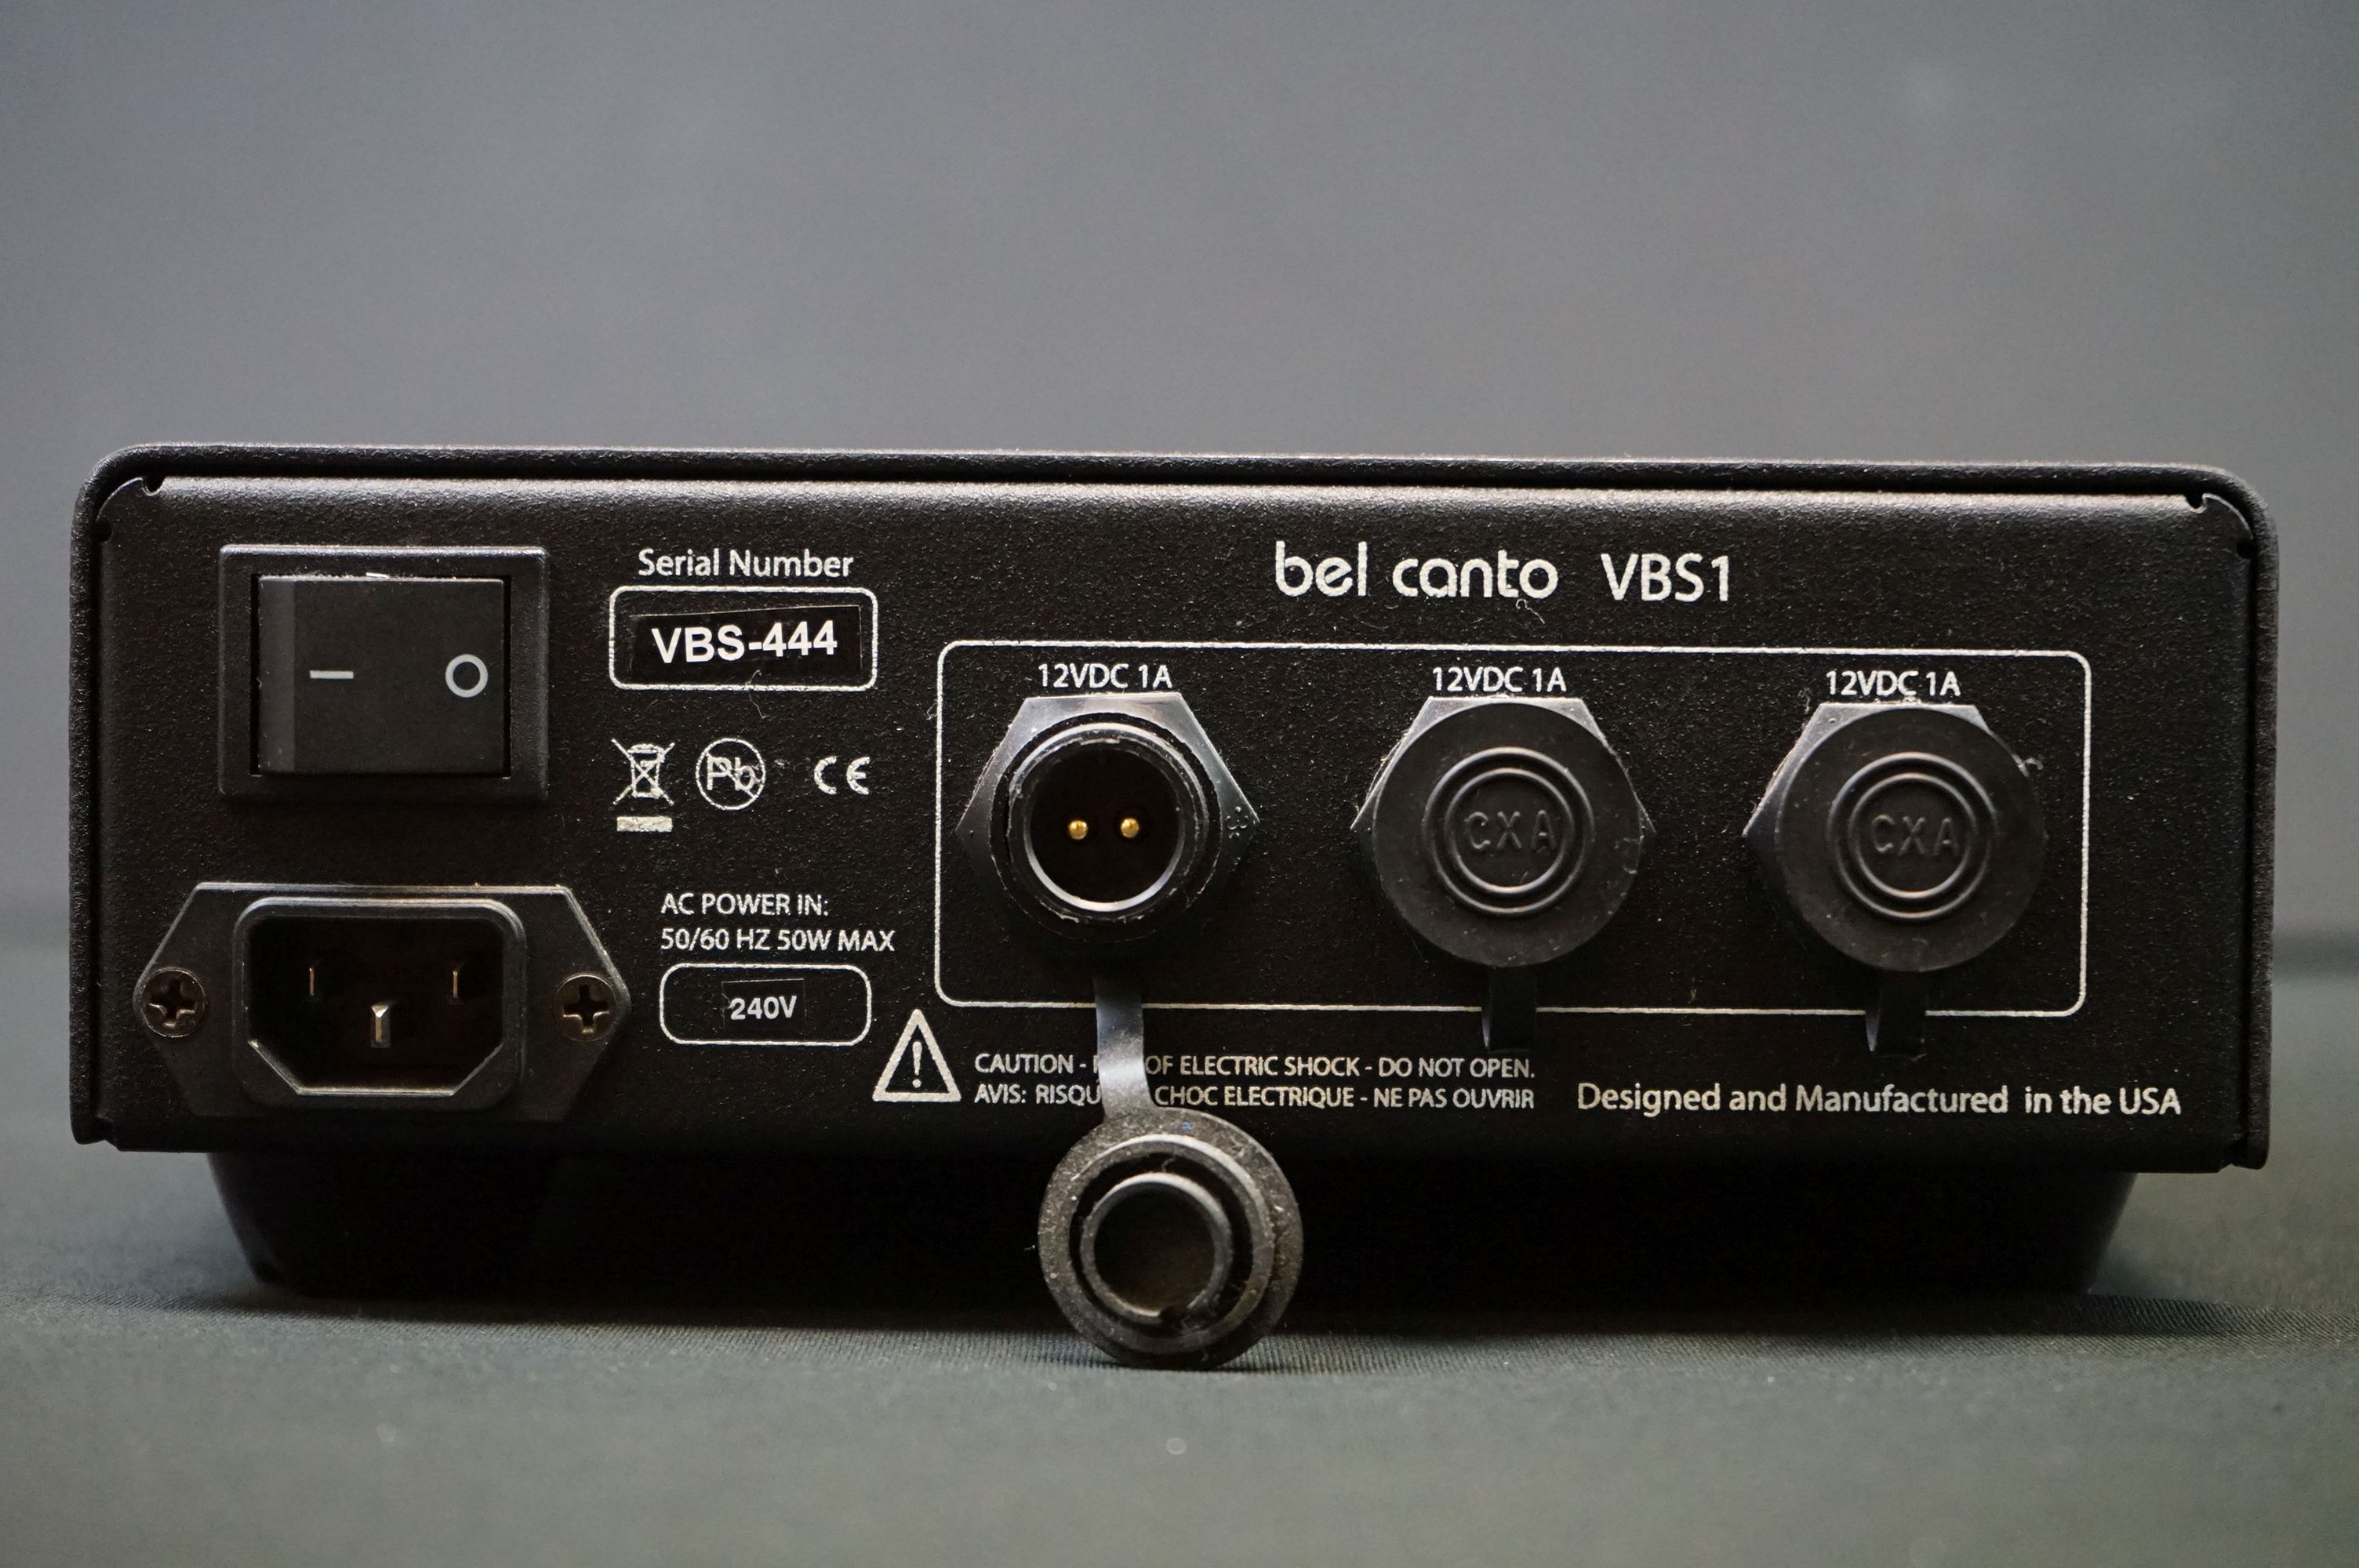 Music Equipment - Bel Canto Design DAC 1.7 DAC Headphone Amp and Level Control, a Bel Canto VBS1 - Image 8 of 9